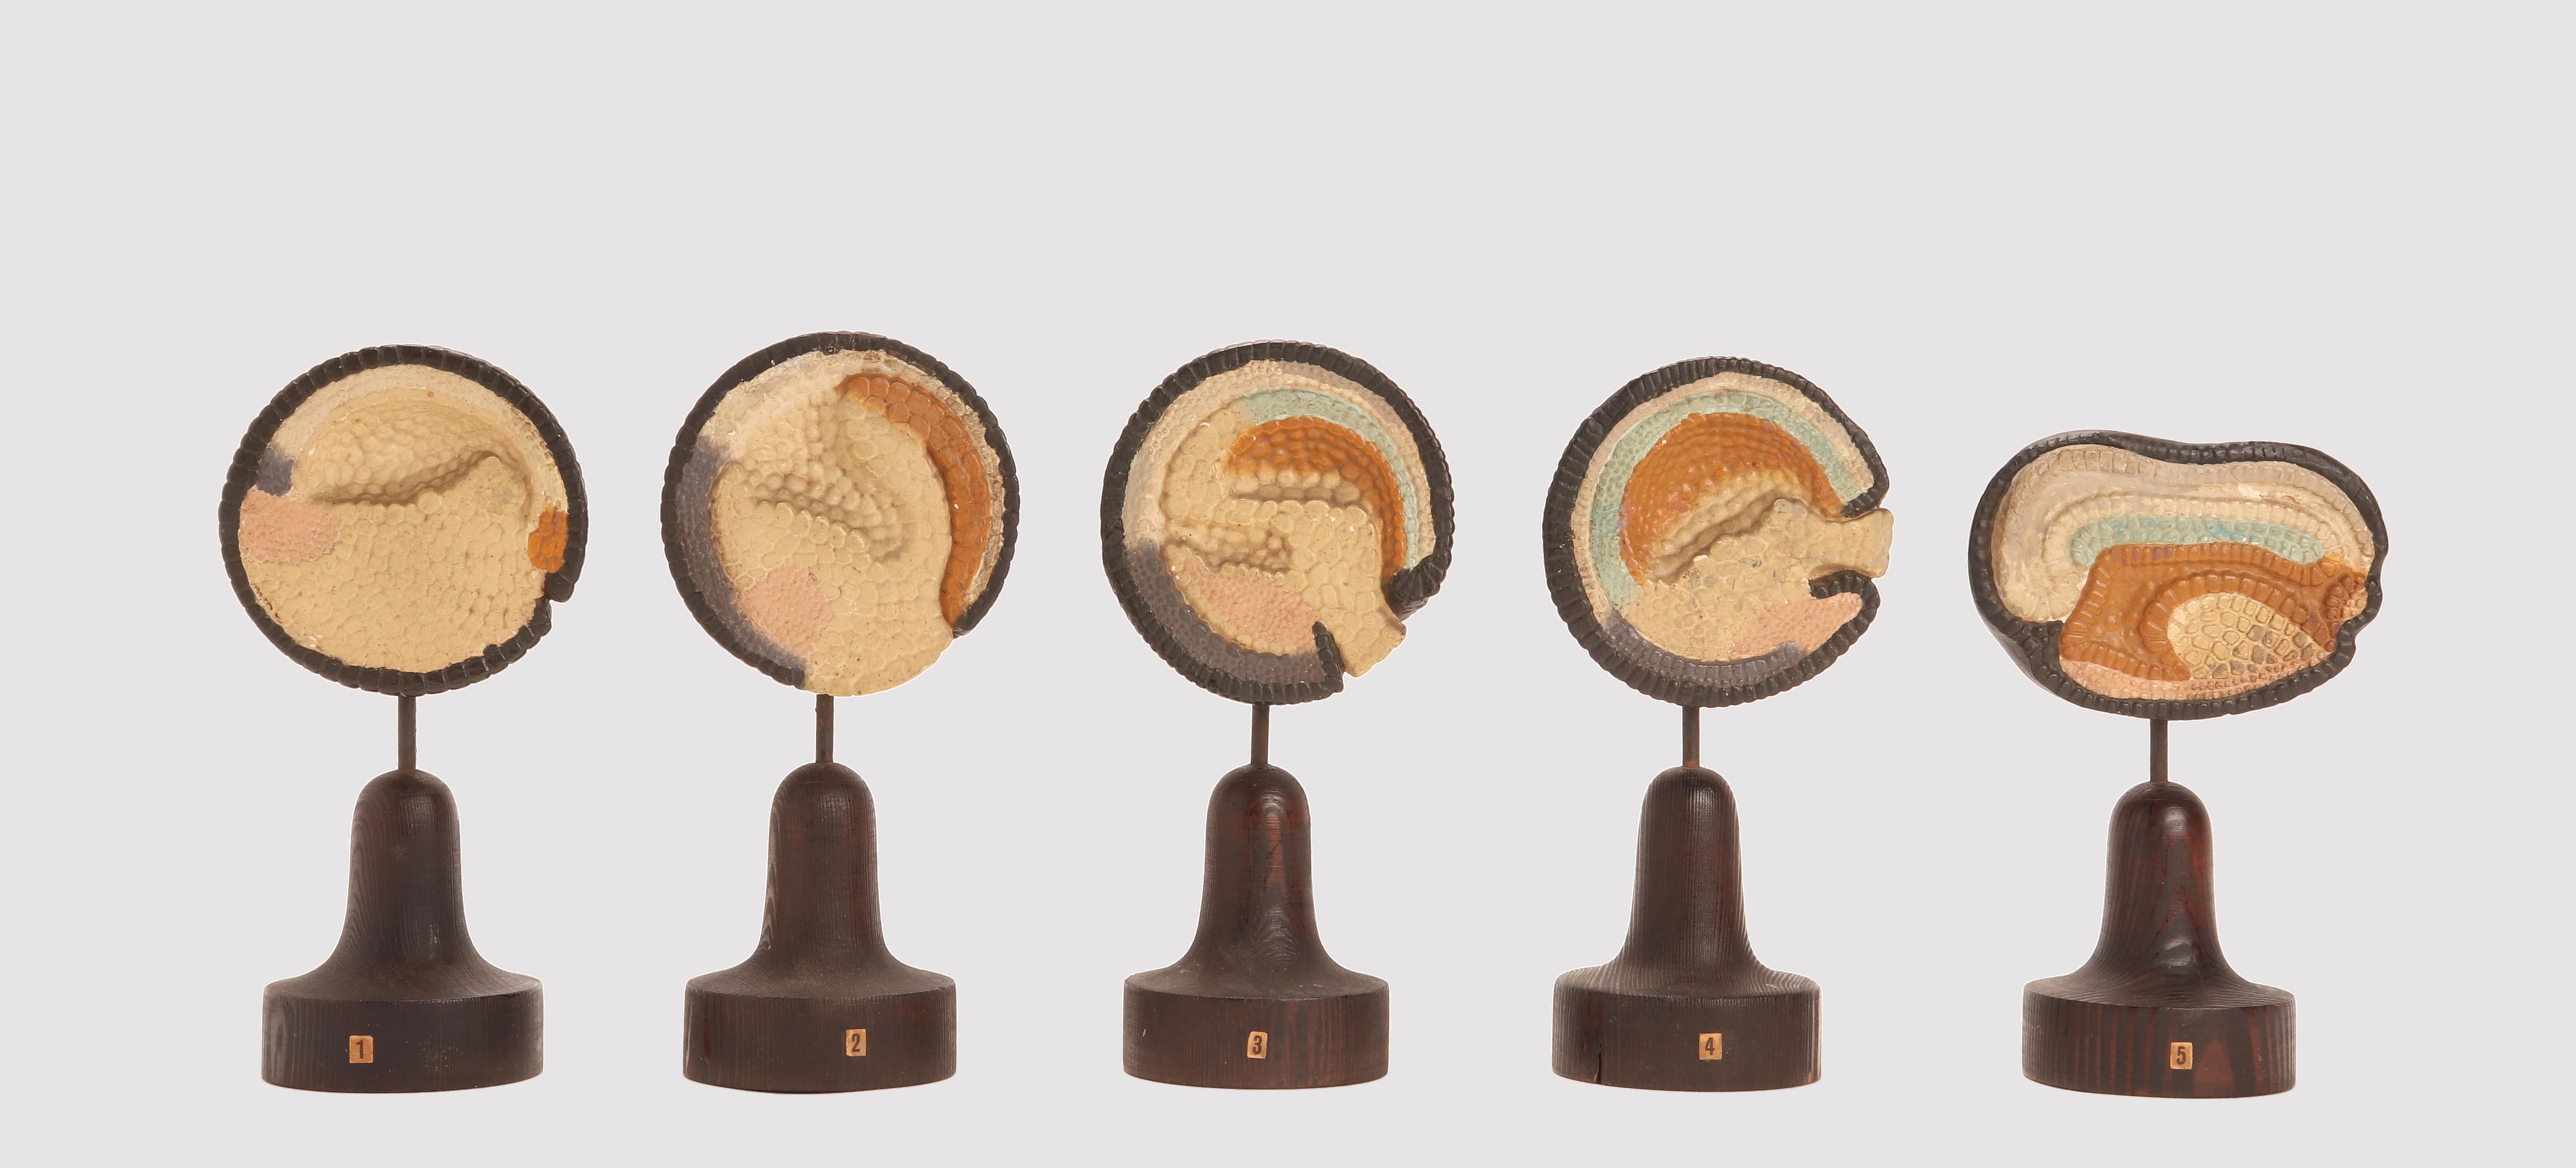 A set of five botanical models depicting in numbered sequence the development of a vegetal embryo. Made out of hand painted plaster, the models are mounted on a wooden base. T. Gerrard & Co Ltd, Pentonville road, preparers, technicians and modelers